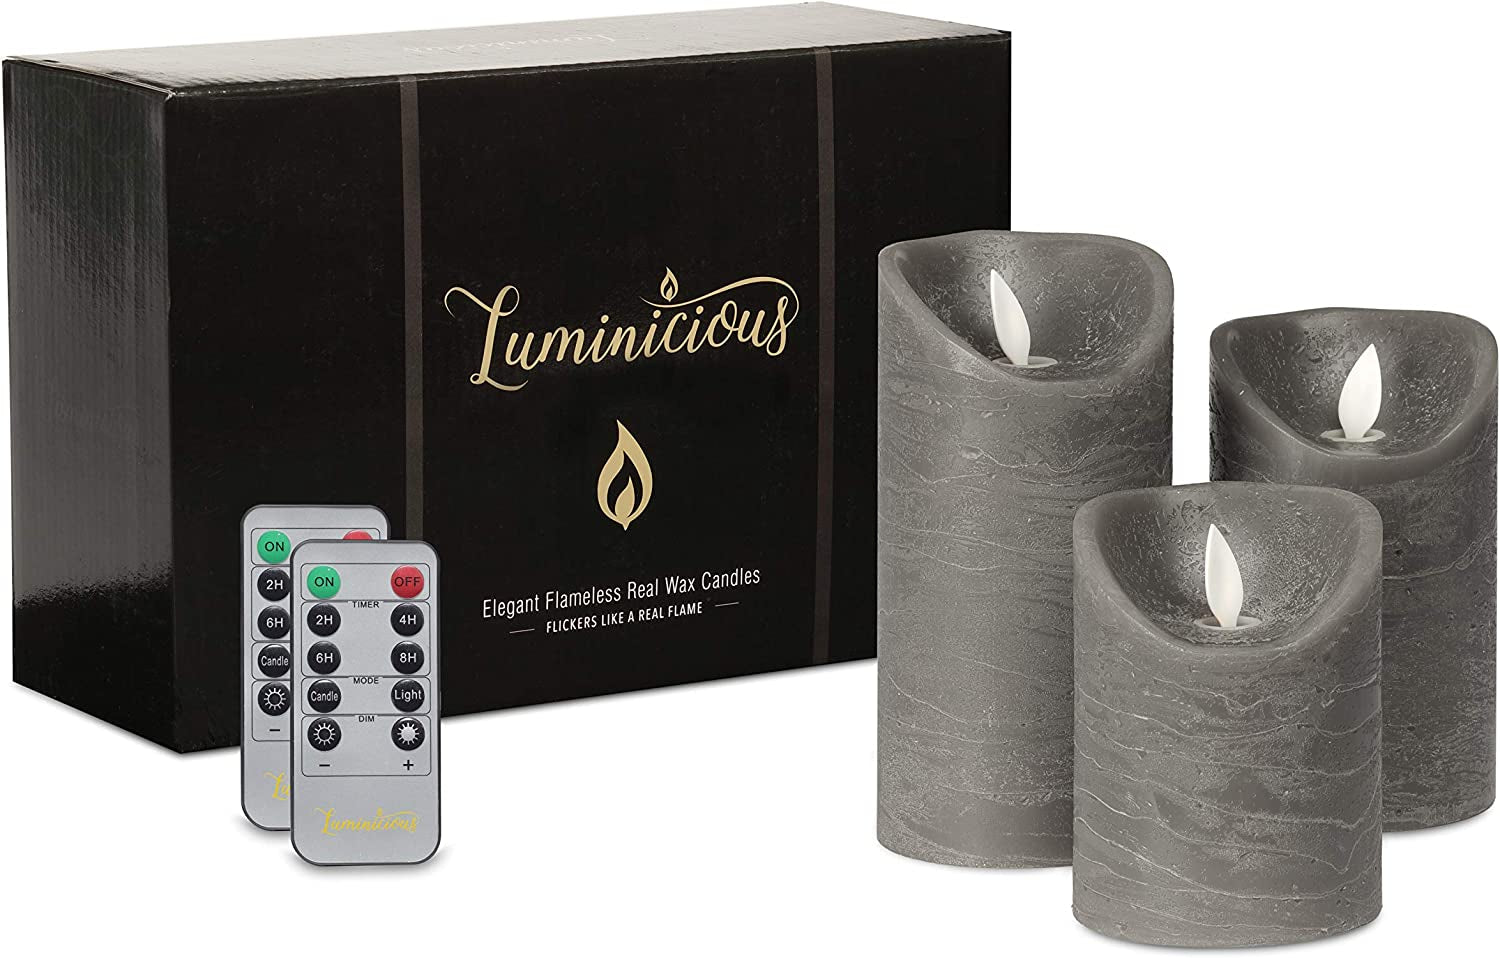 Luminicious, Flameless Candles Flickering LED | Battery Operated Electric Pillar Candle | Realistic Moving Flame Flicker with Remote Control & Timer | Real Wax Grey | Great Home Decor | Decorative Gift